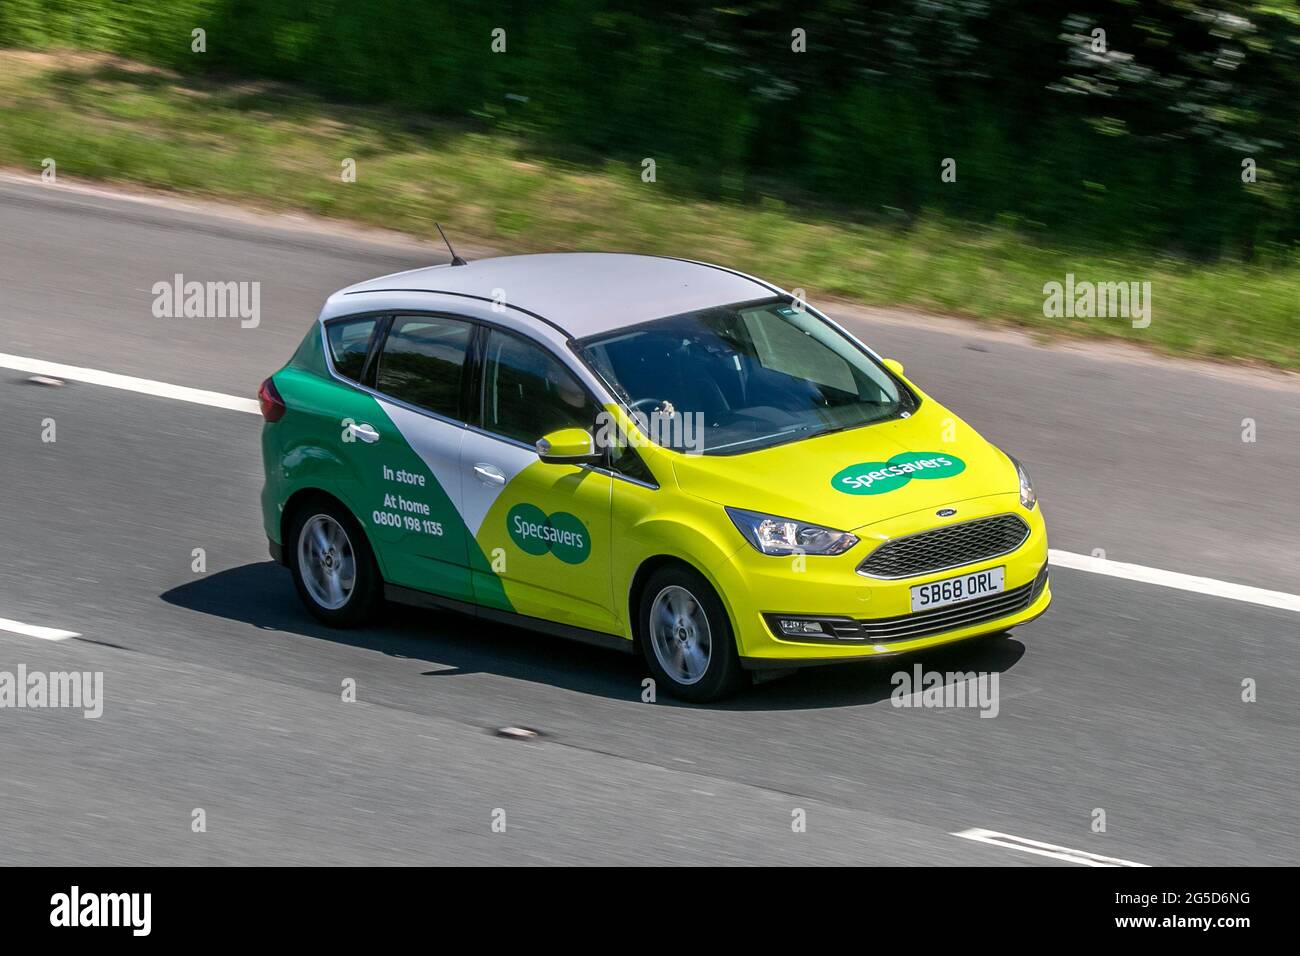 A Specsavers Opticians car driving on the M6 motorway near Preston in Lancashire, UK Stock Photo